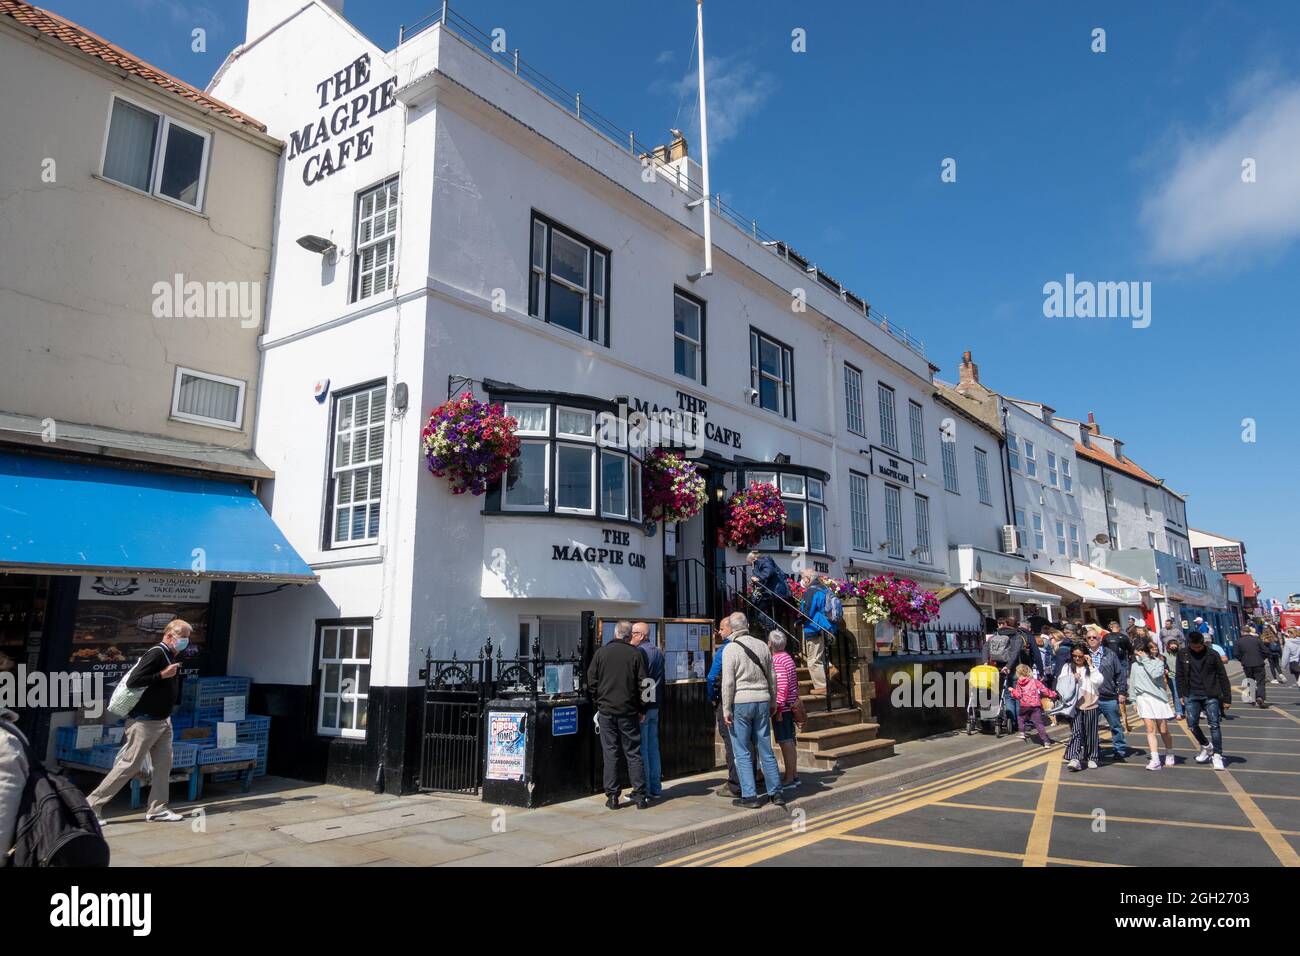 The Magpie Cafe, Whitby, North Yorkshire, UK Stock Photo